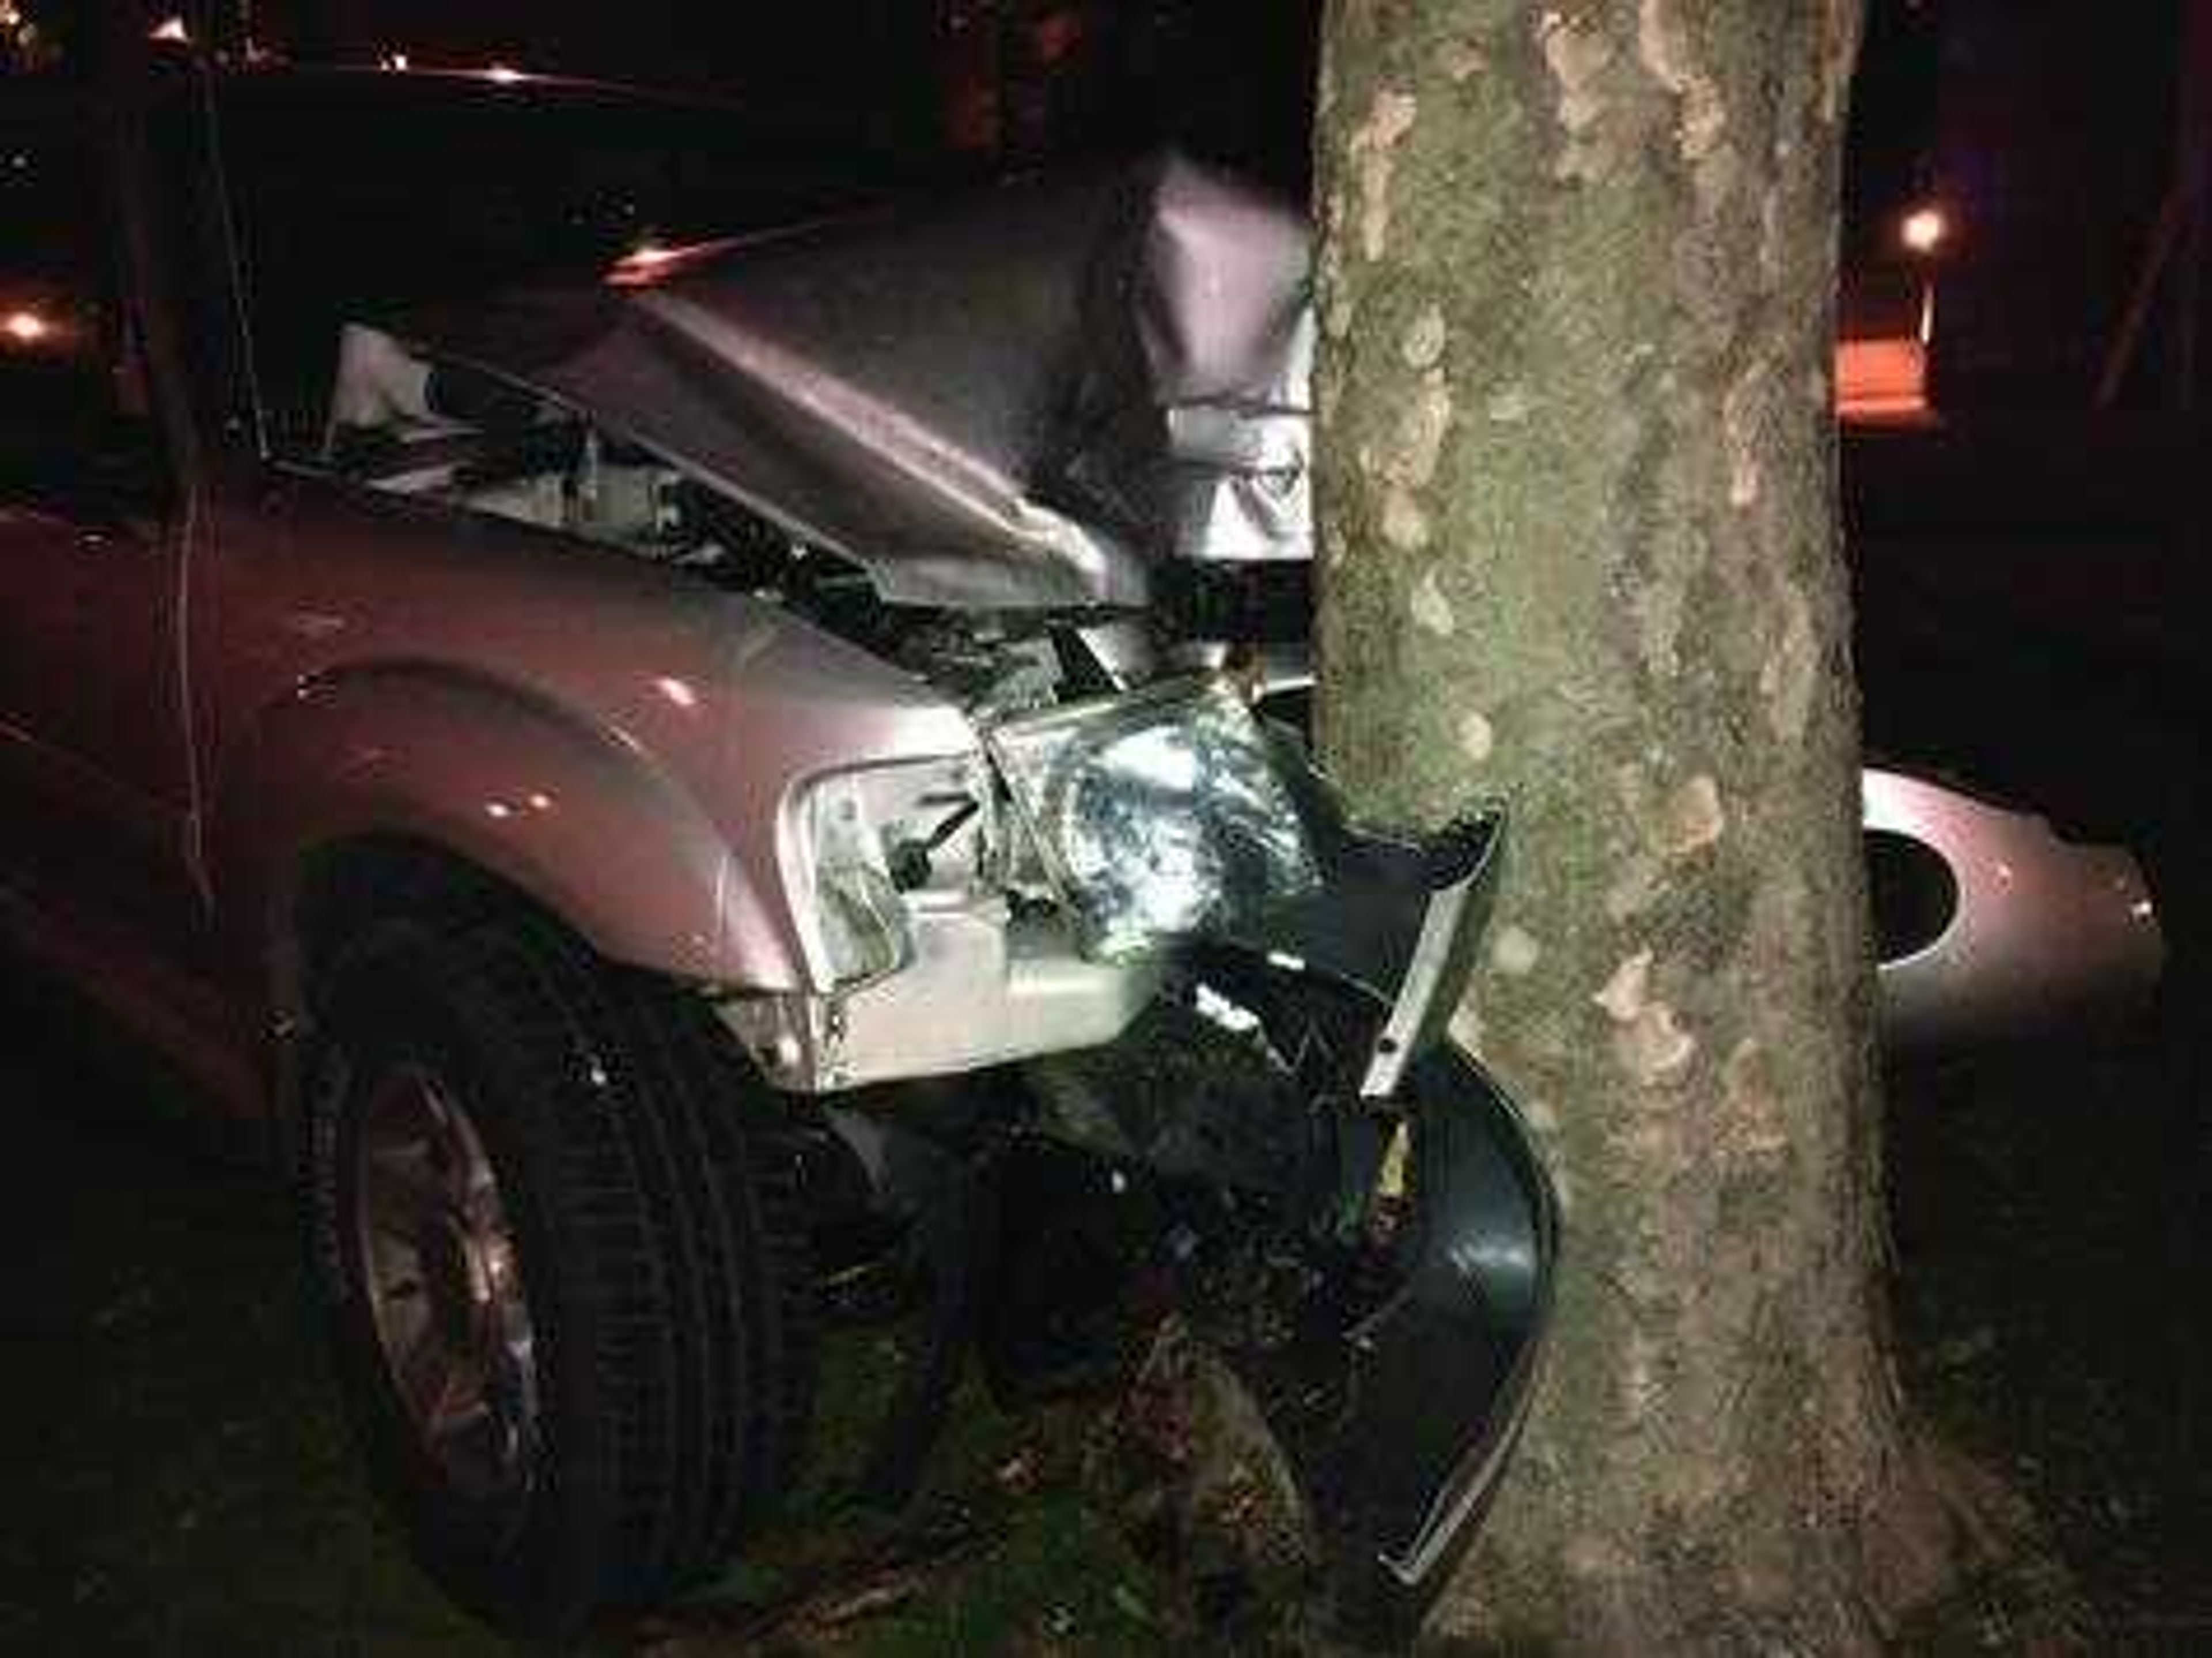 A student crashed head on into a tree by Towers Circle on Jan. 27, and no injuries were reported.